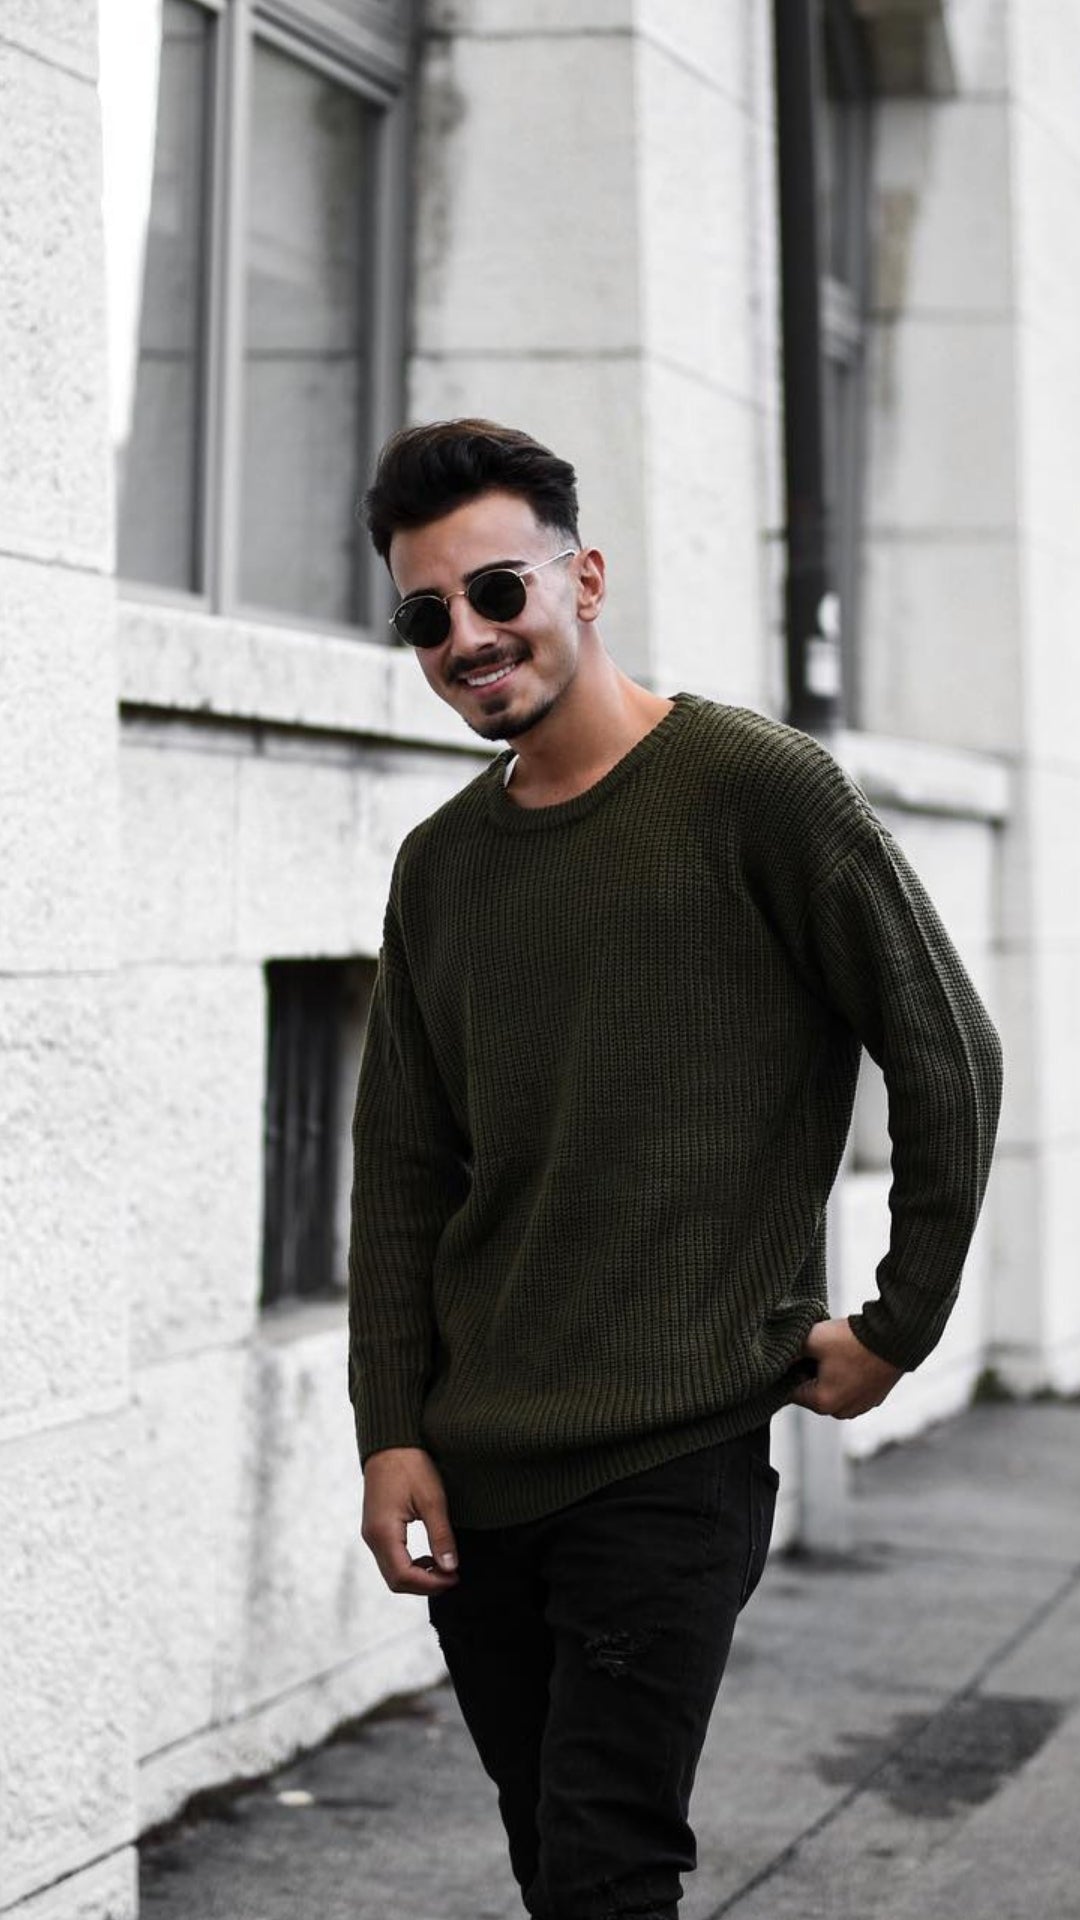 5 Casual Outfits For Guys #casual #outfits #mensfashion #streetstyle